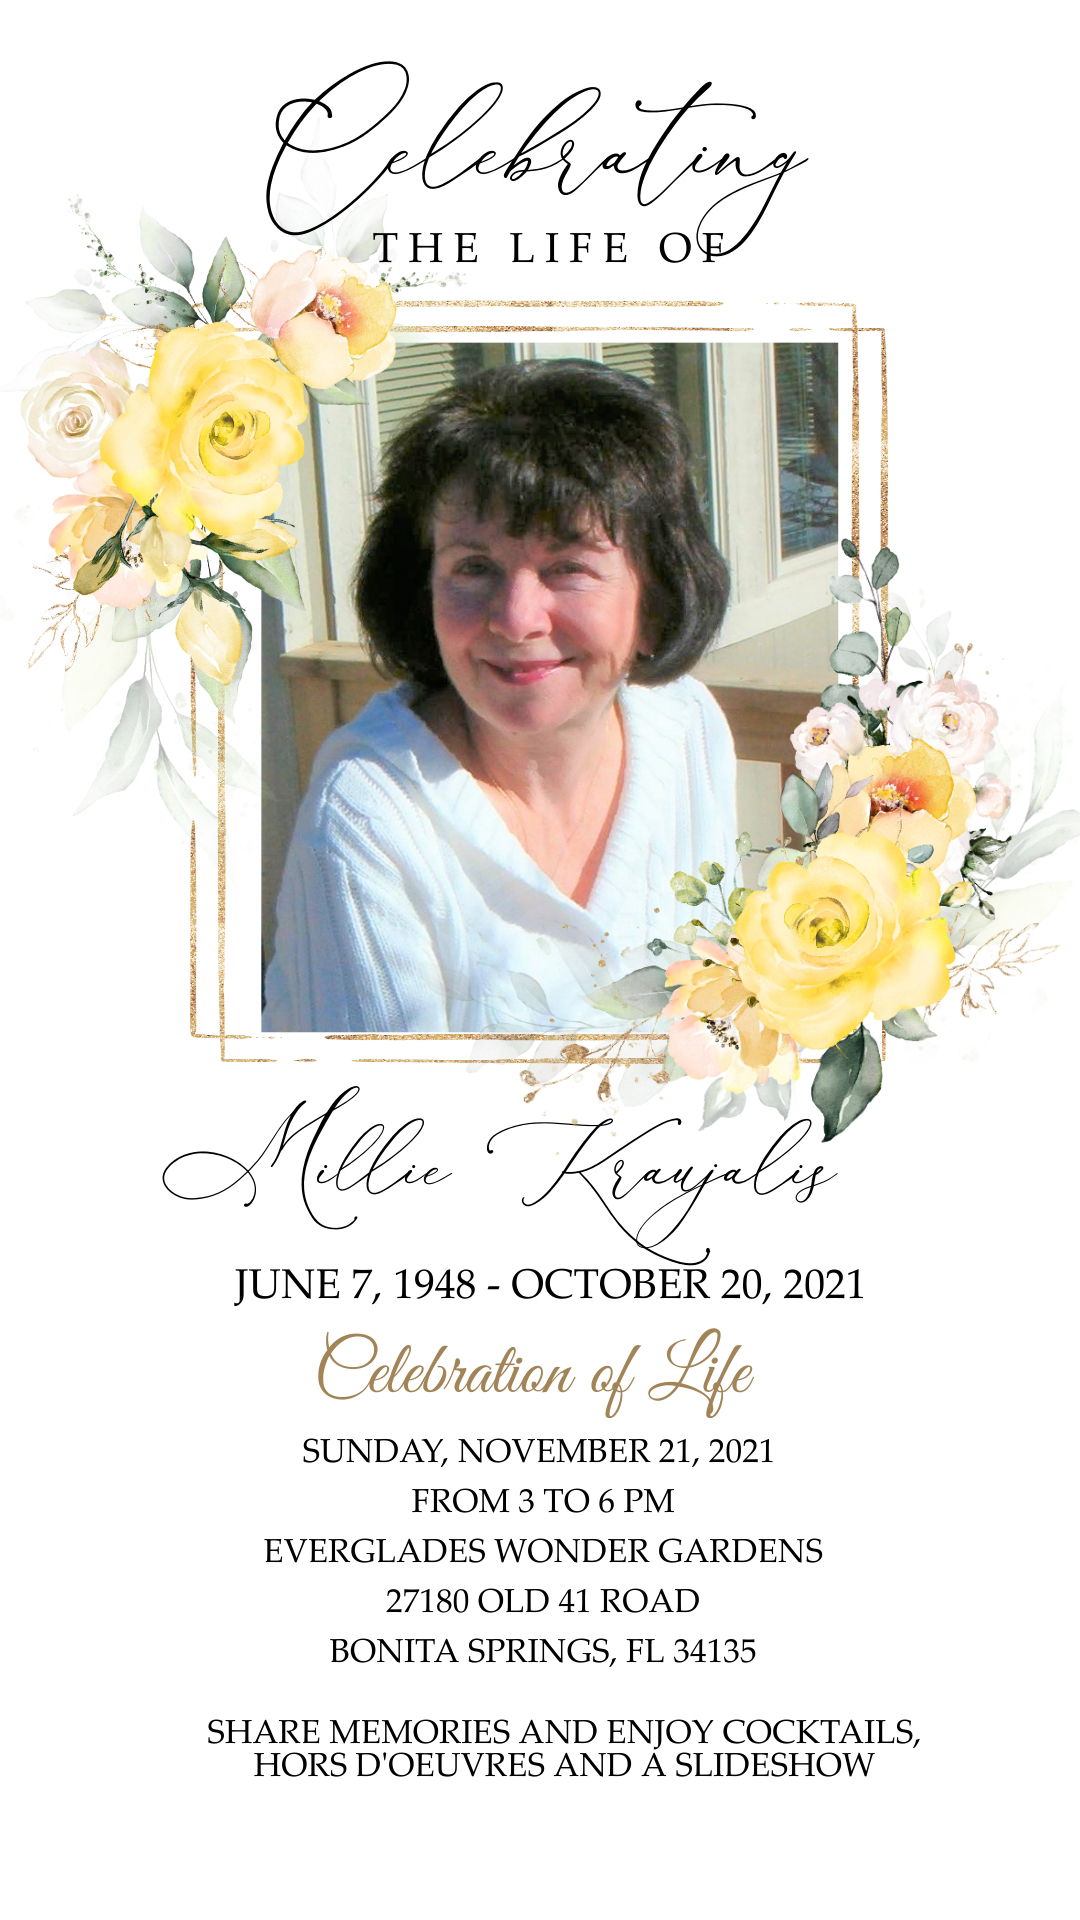 Thank you all for your kind words during this difficult time. Here is the information for my mom's Celebration of Life for those who would like to and are able to attend. <3